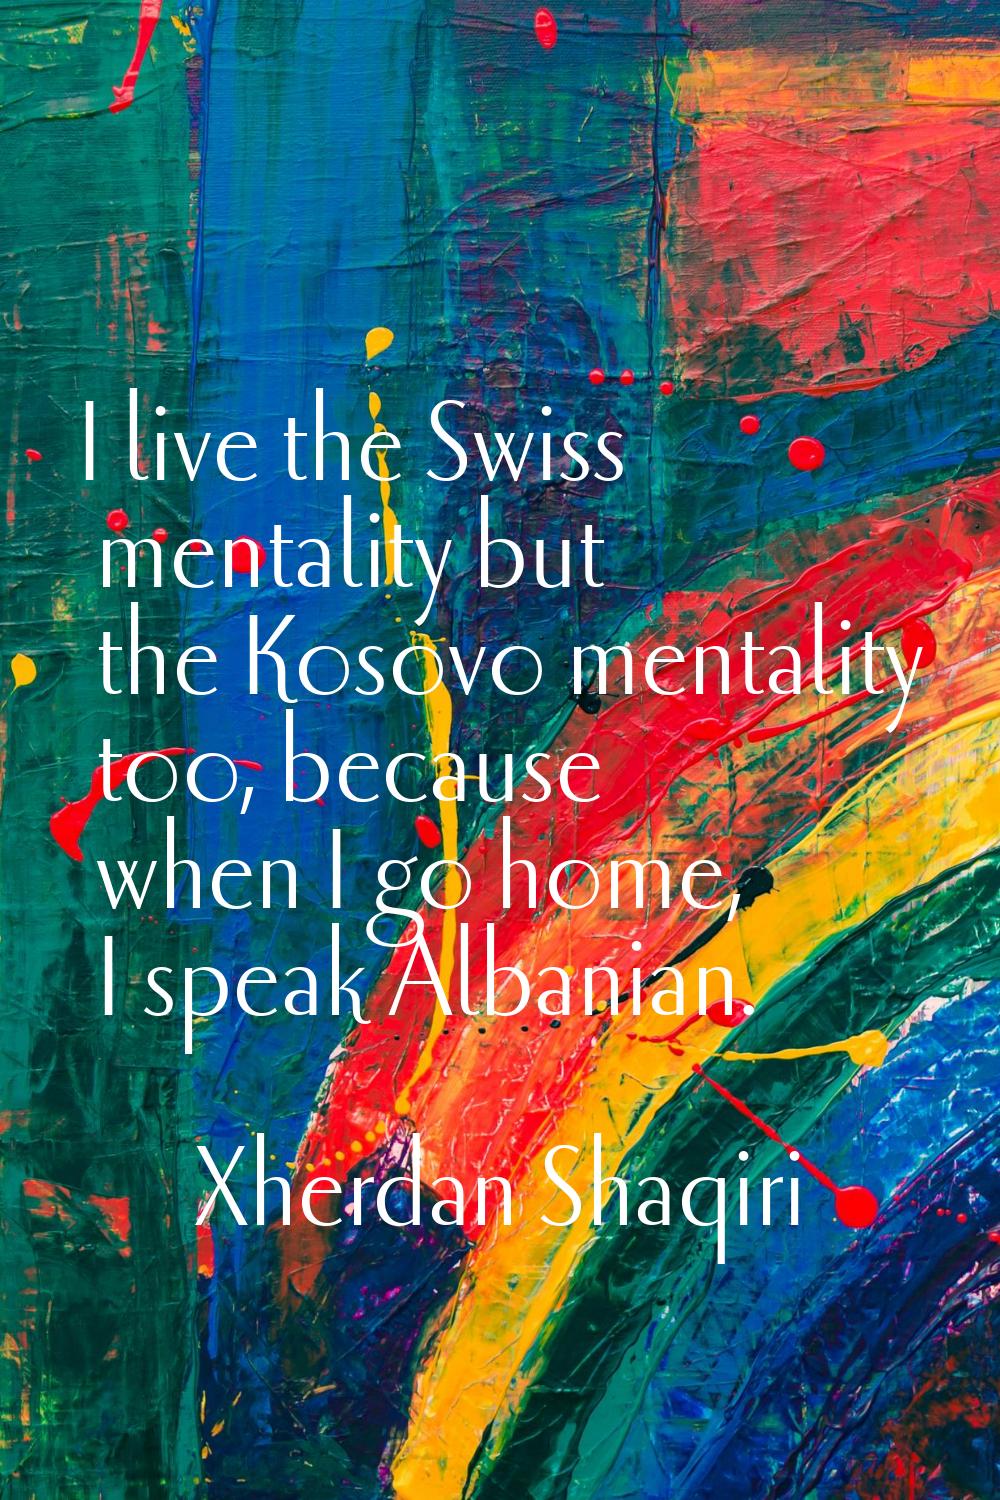 I live the Swiss mentality but the Kosovo mentality too, because when I go home, I speak Albanian.